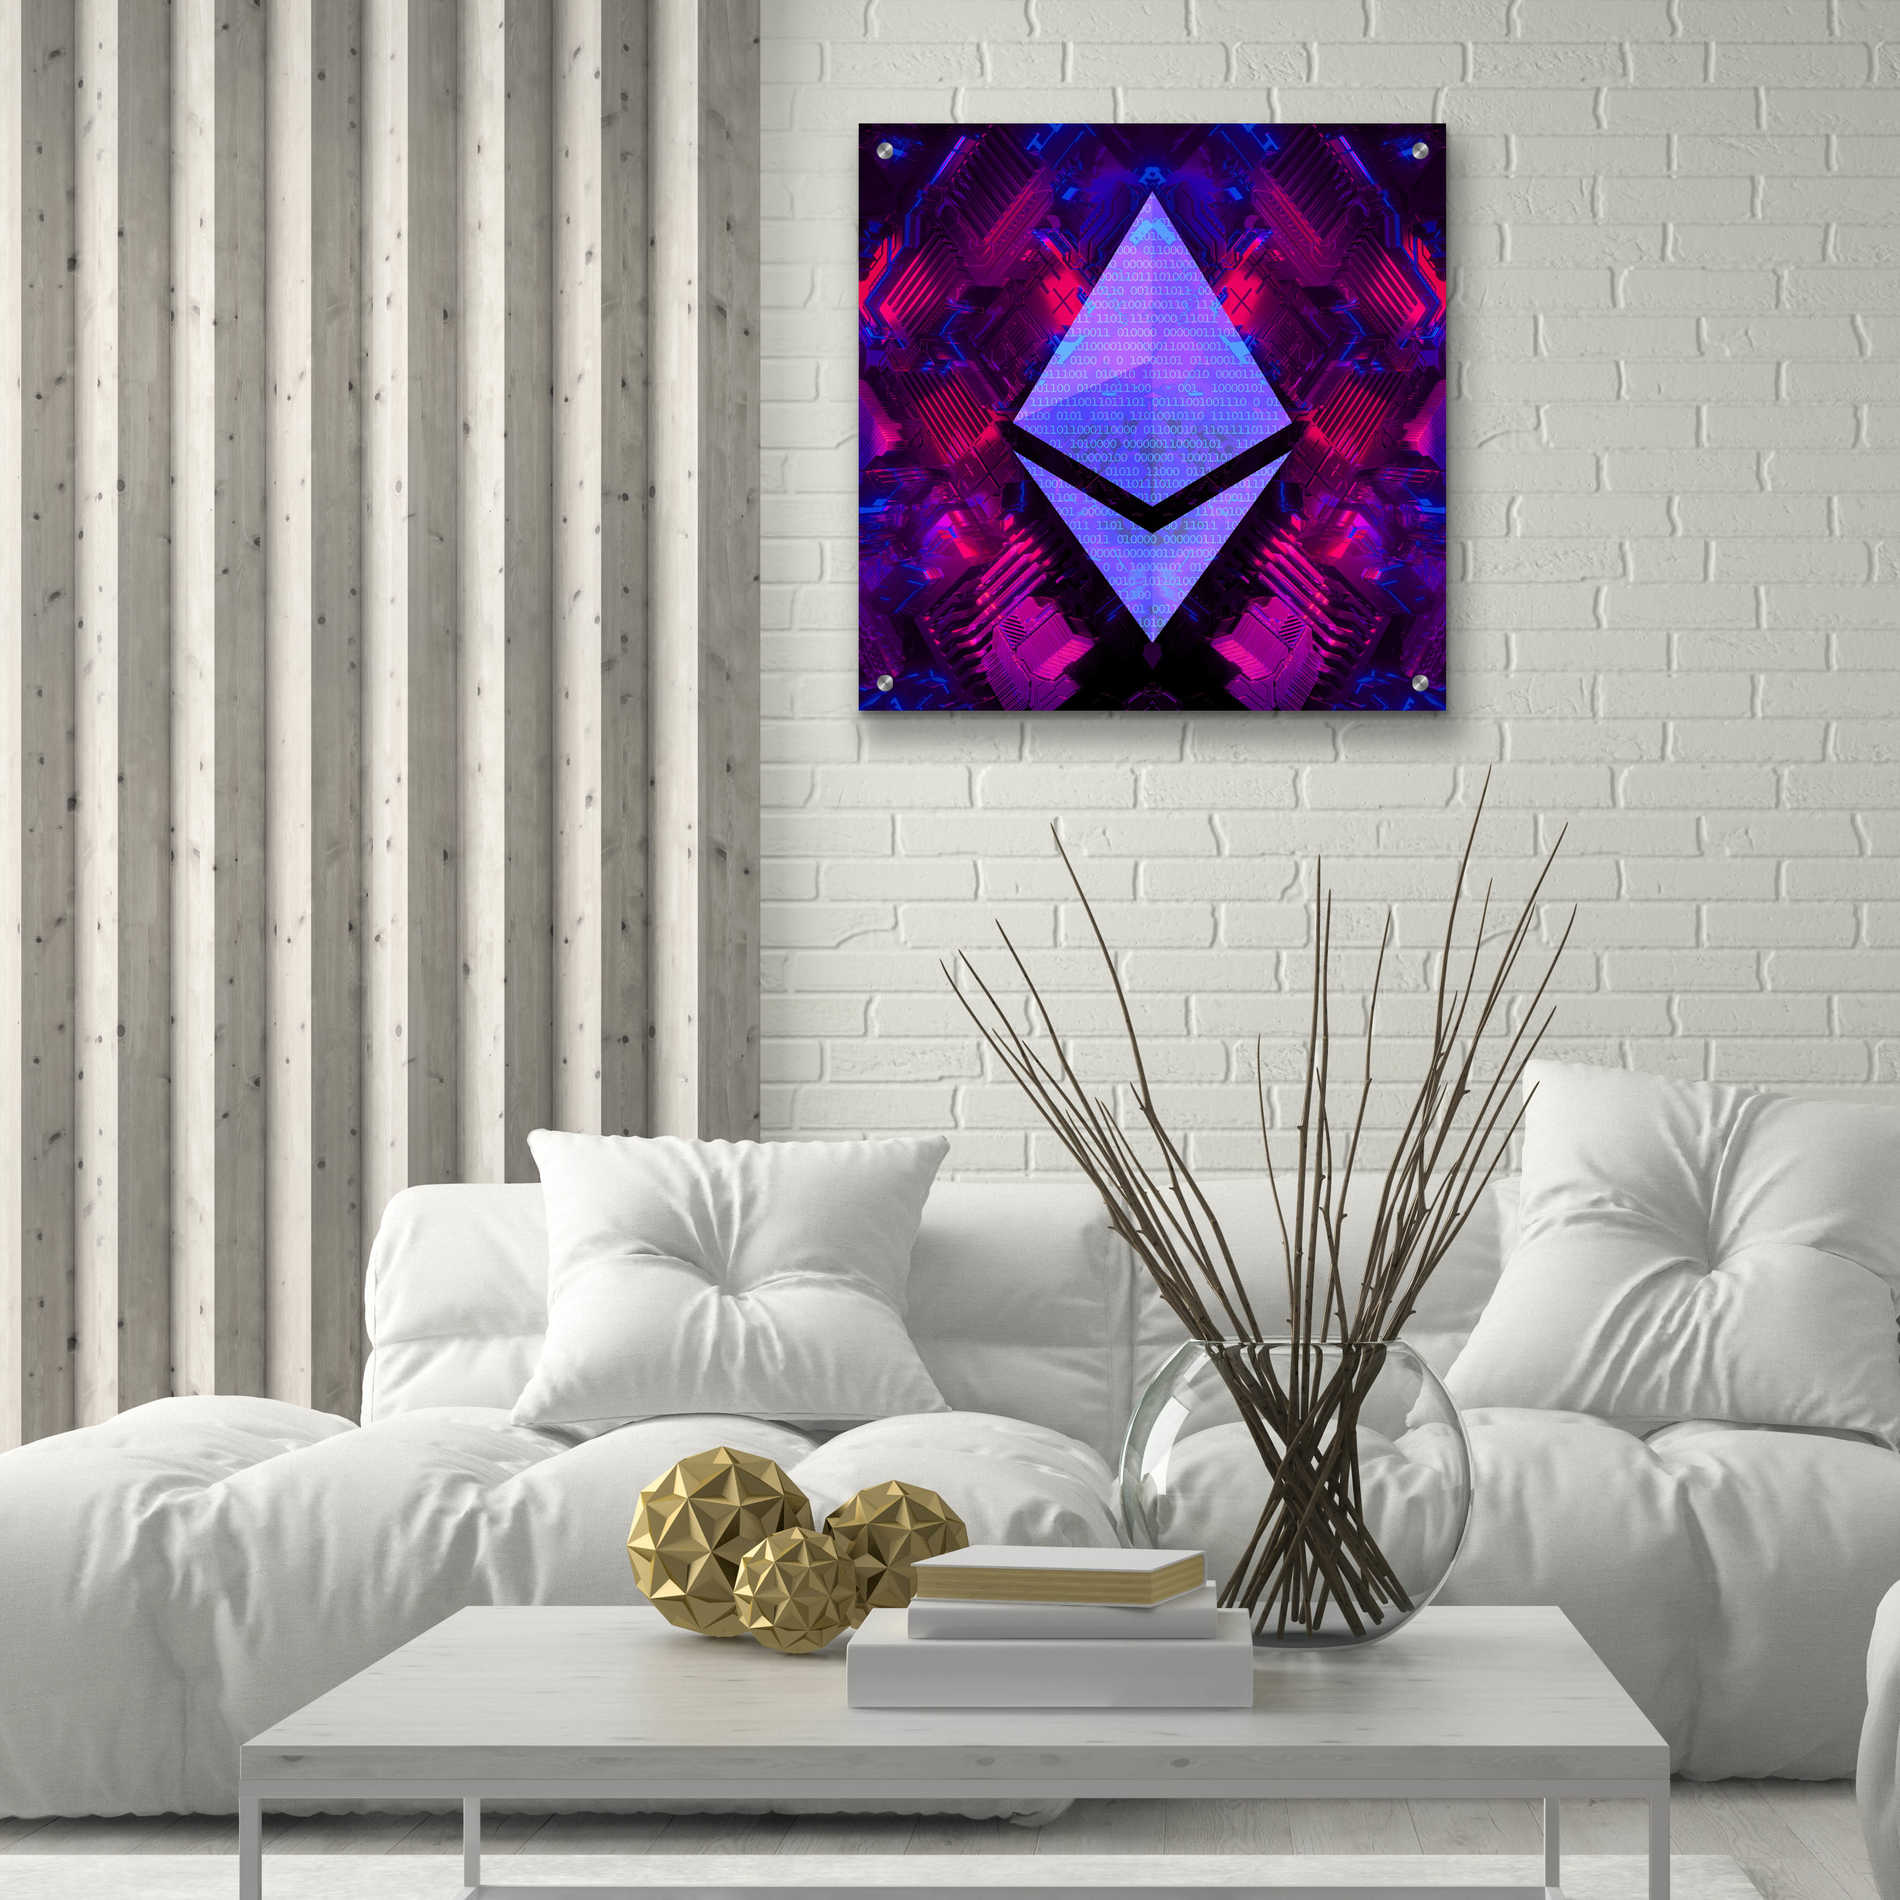 Epic Art 'Ethereum Future' by Cameron Gray Acrylic Glass Wall Art,24x24